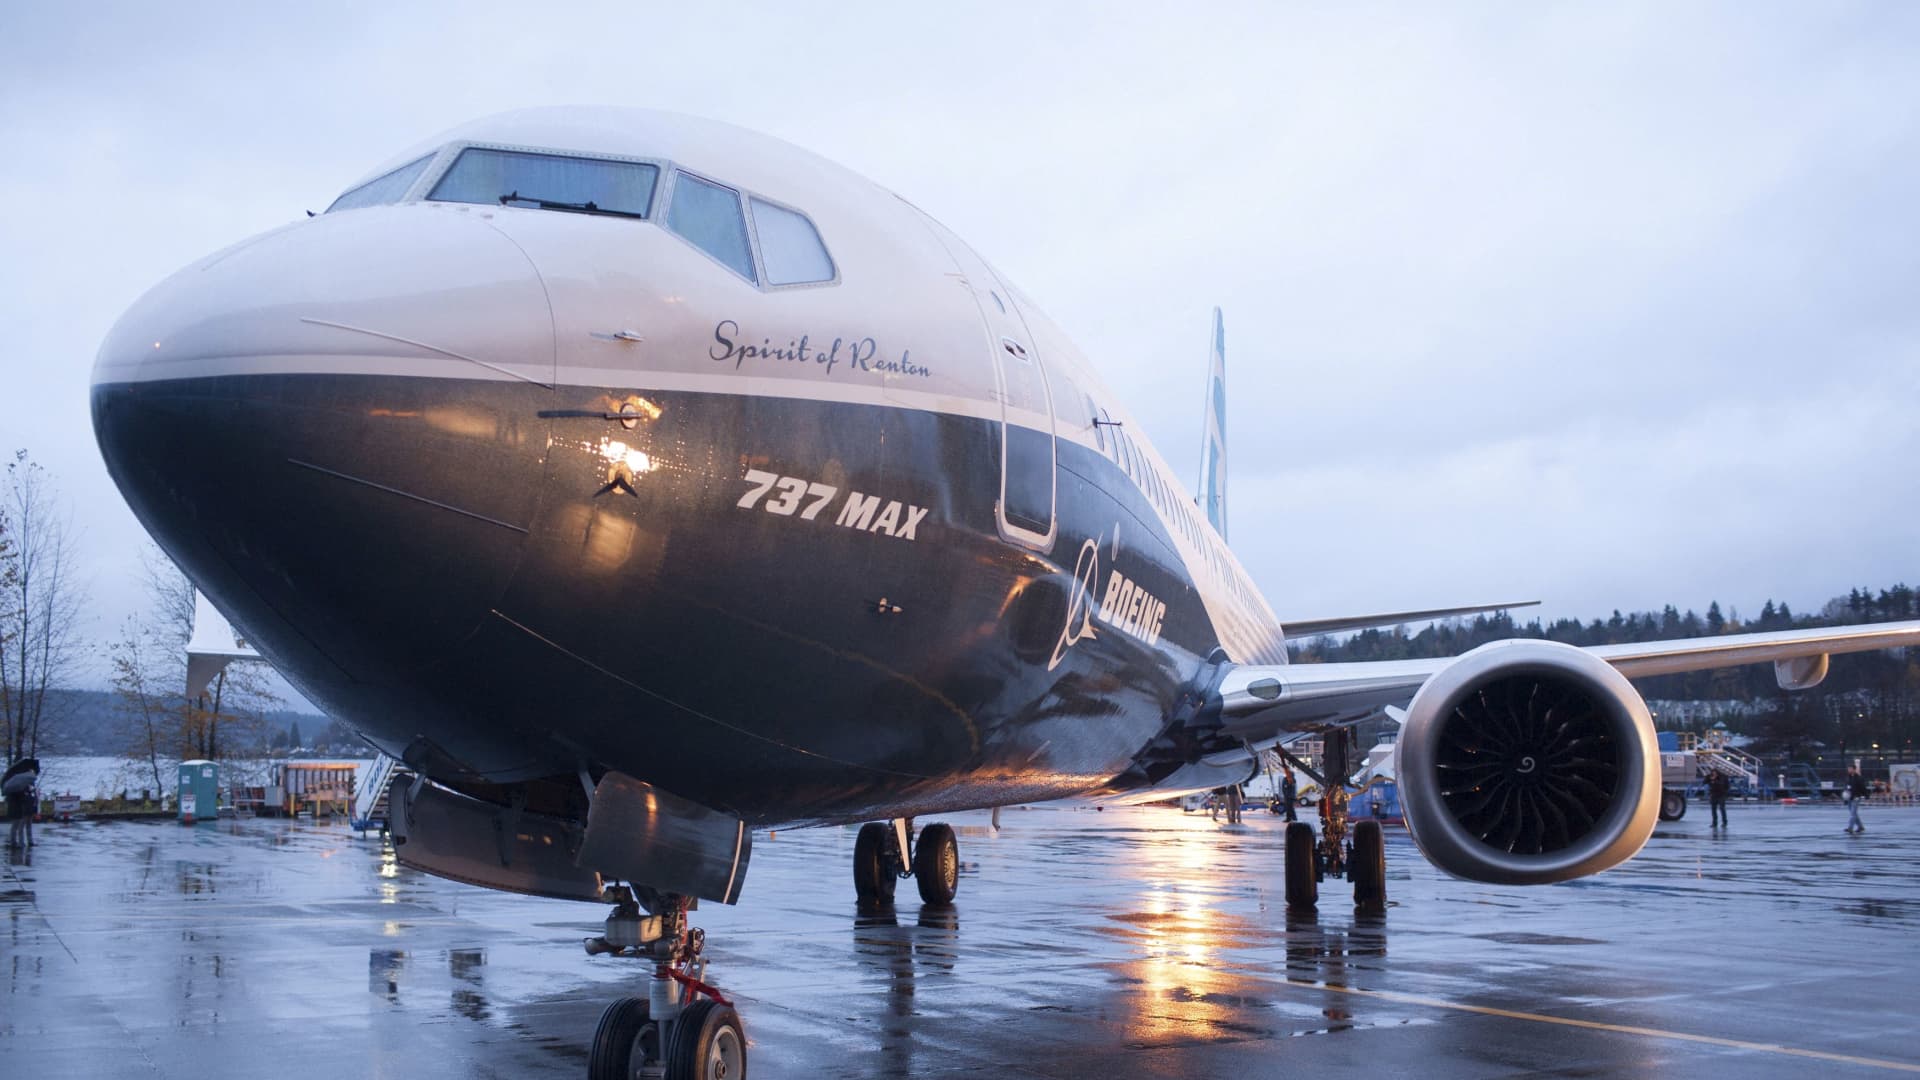 Morgan Stanley downgrades Boeing, says shares are approaching ‘cruising altitude’ after recent outperformance